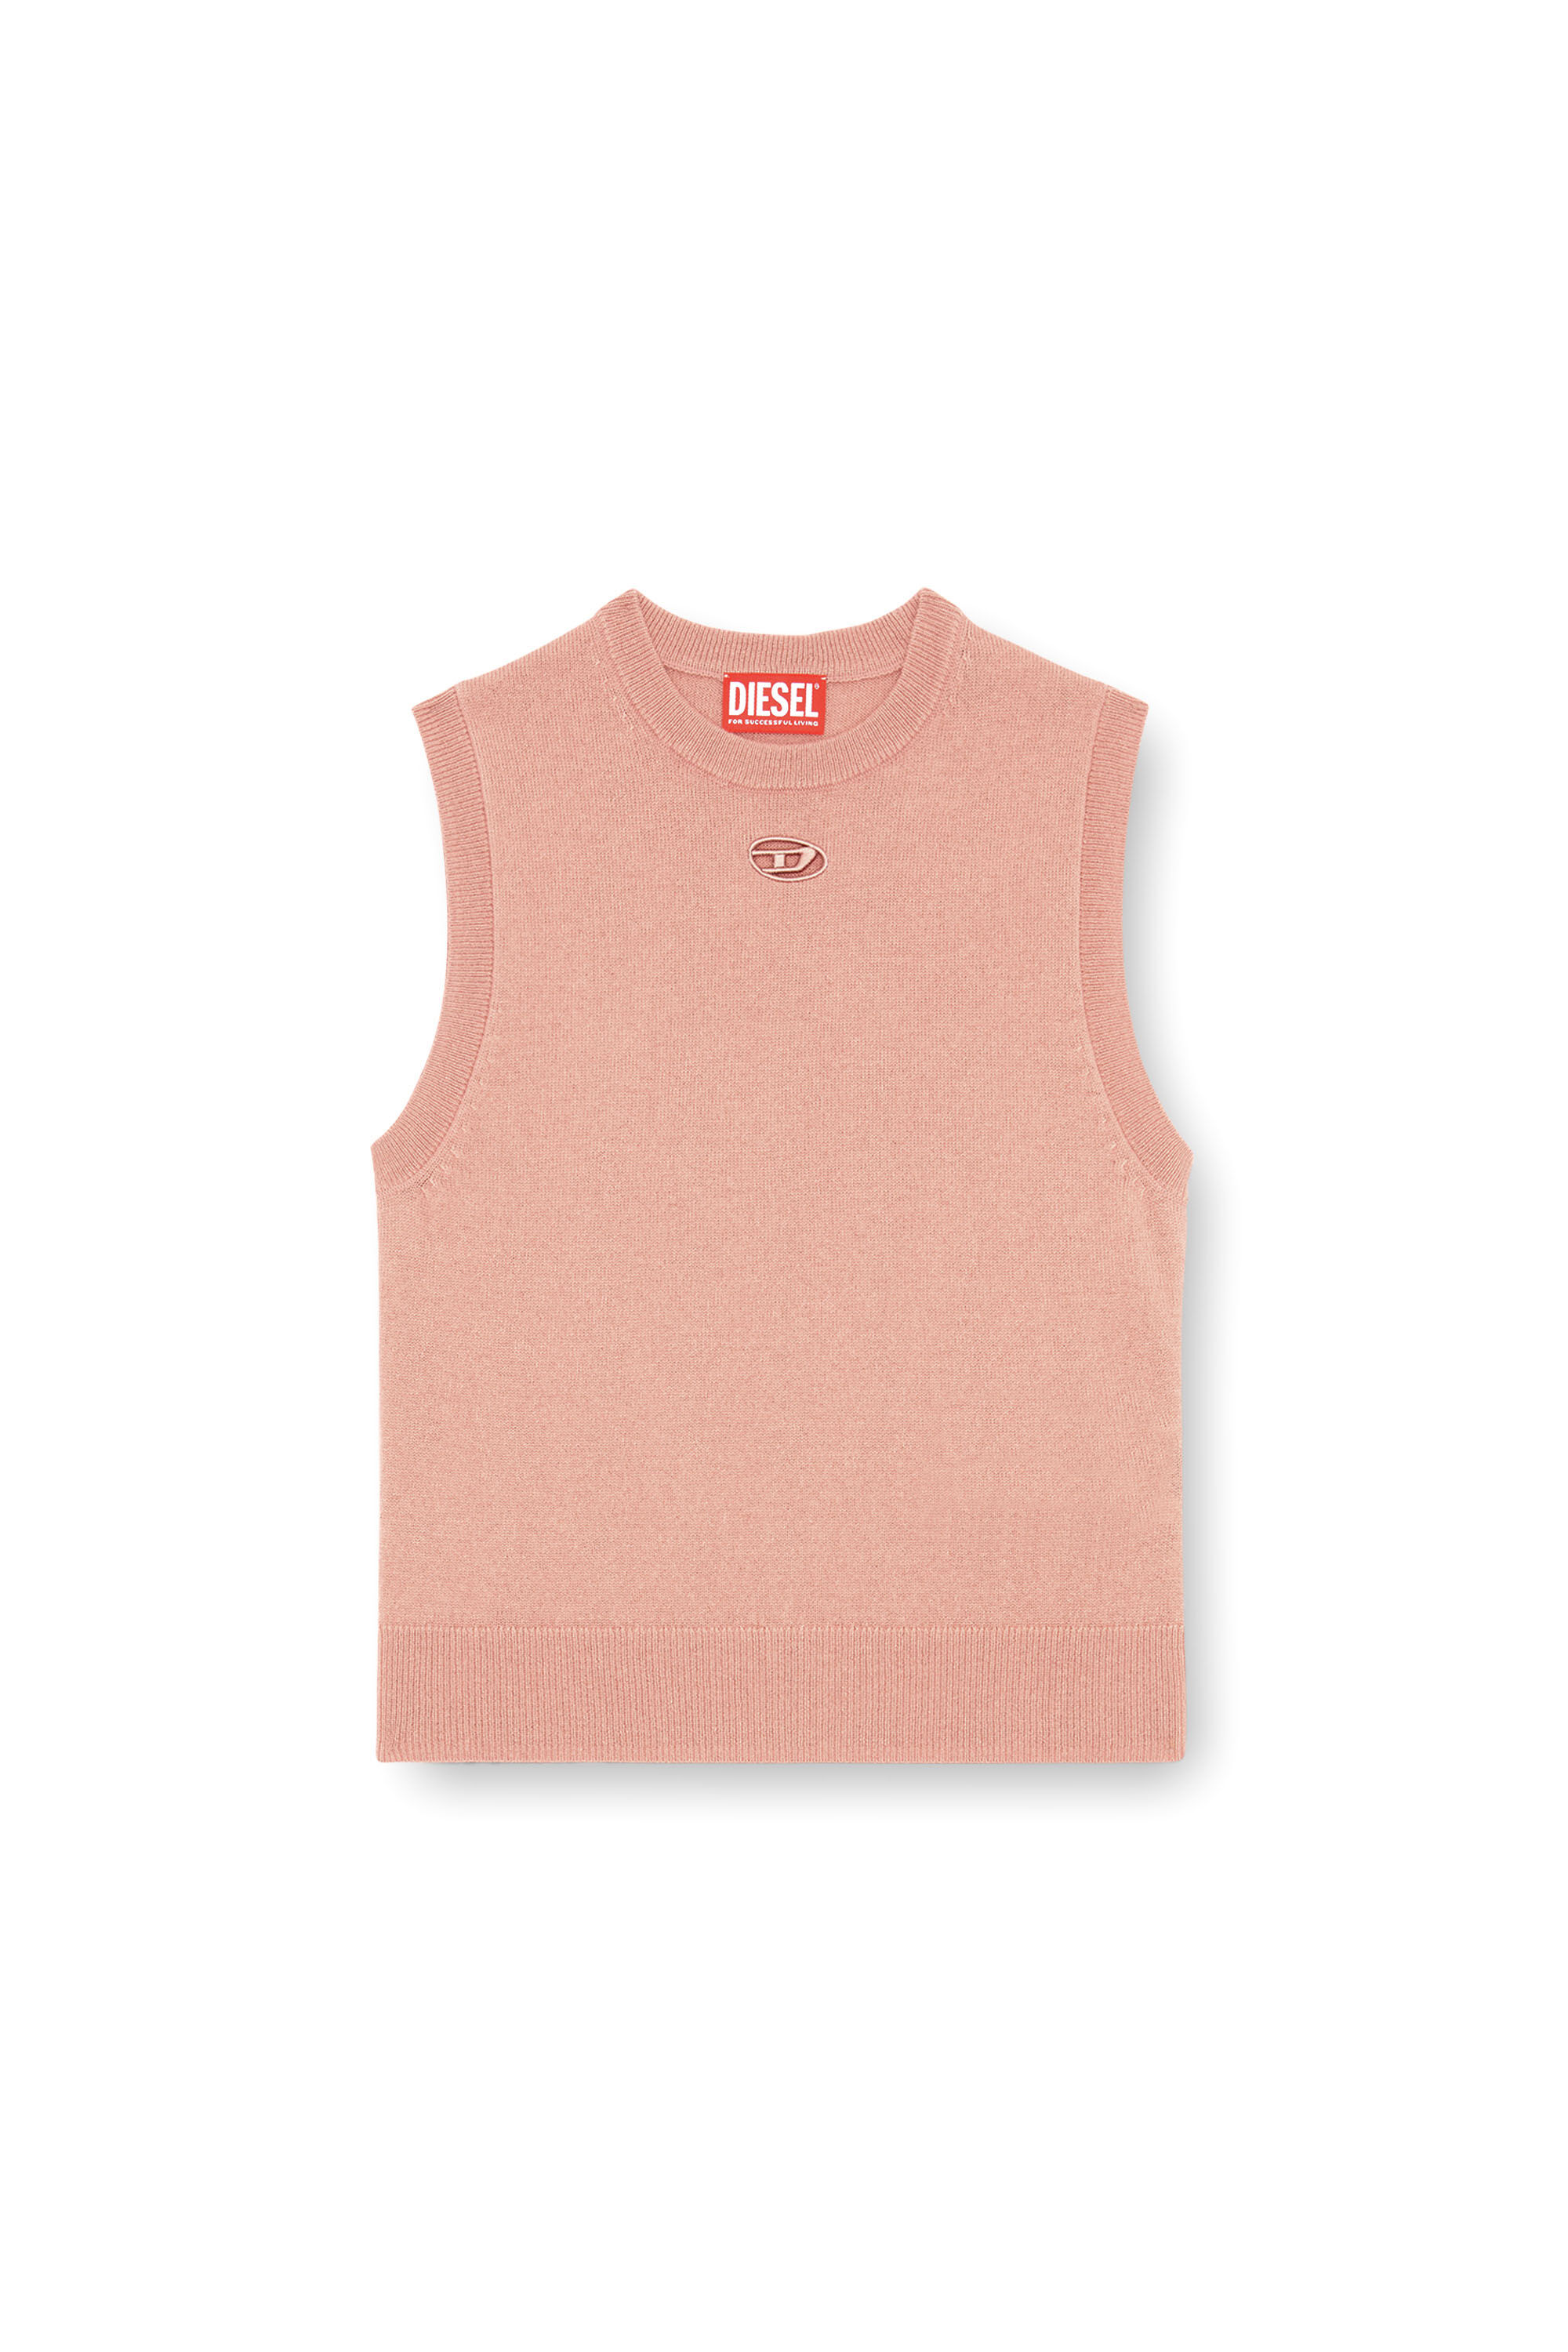 Diesel - M-ARGA-SL, Woman Cropped vest in wool and cashmere knit in Pink - Image 2